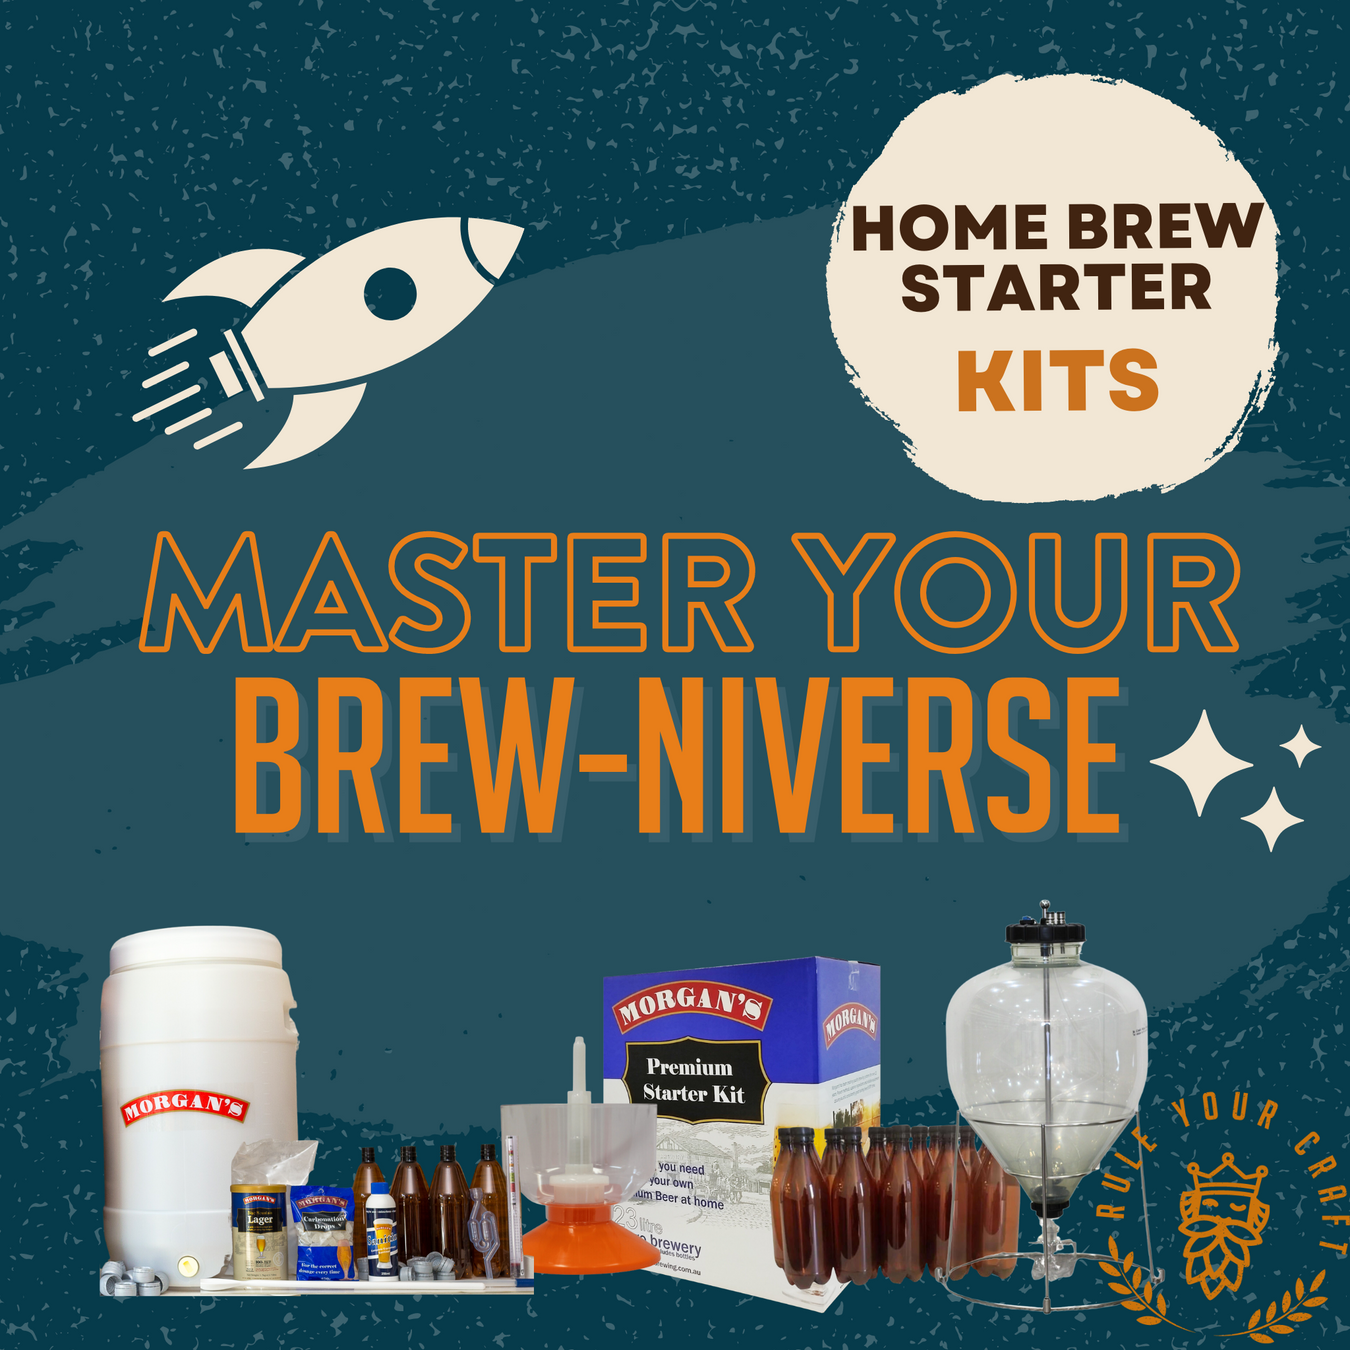 Noble Barons Home Brew Supplies Store - Homebrewing starter kits